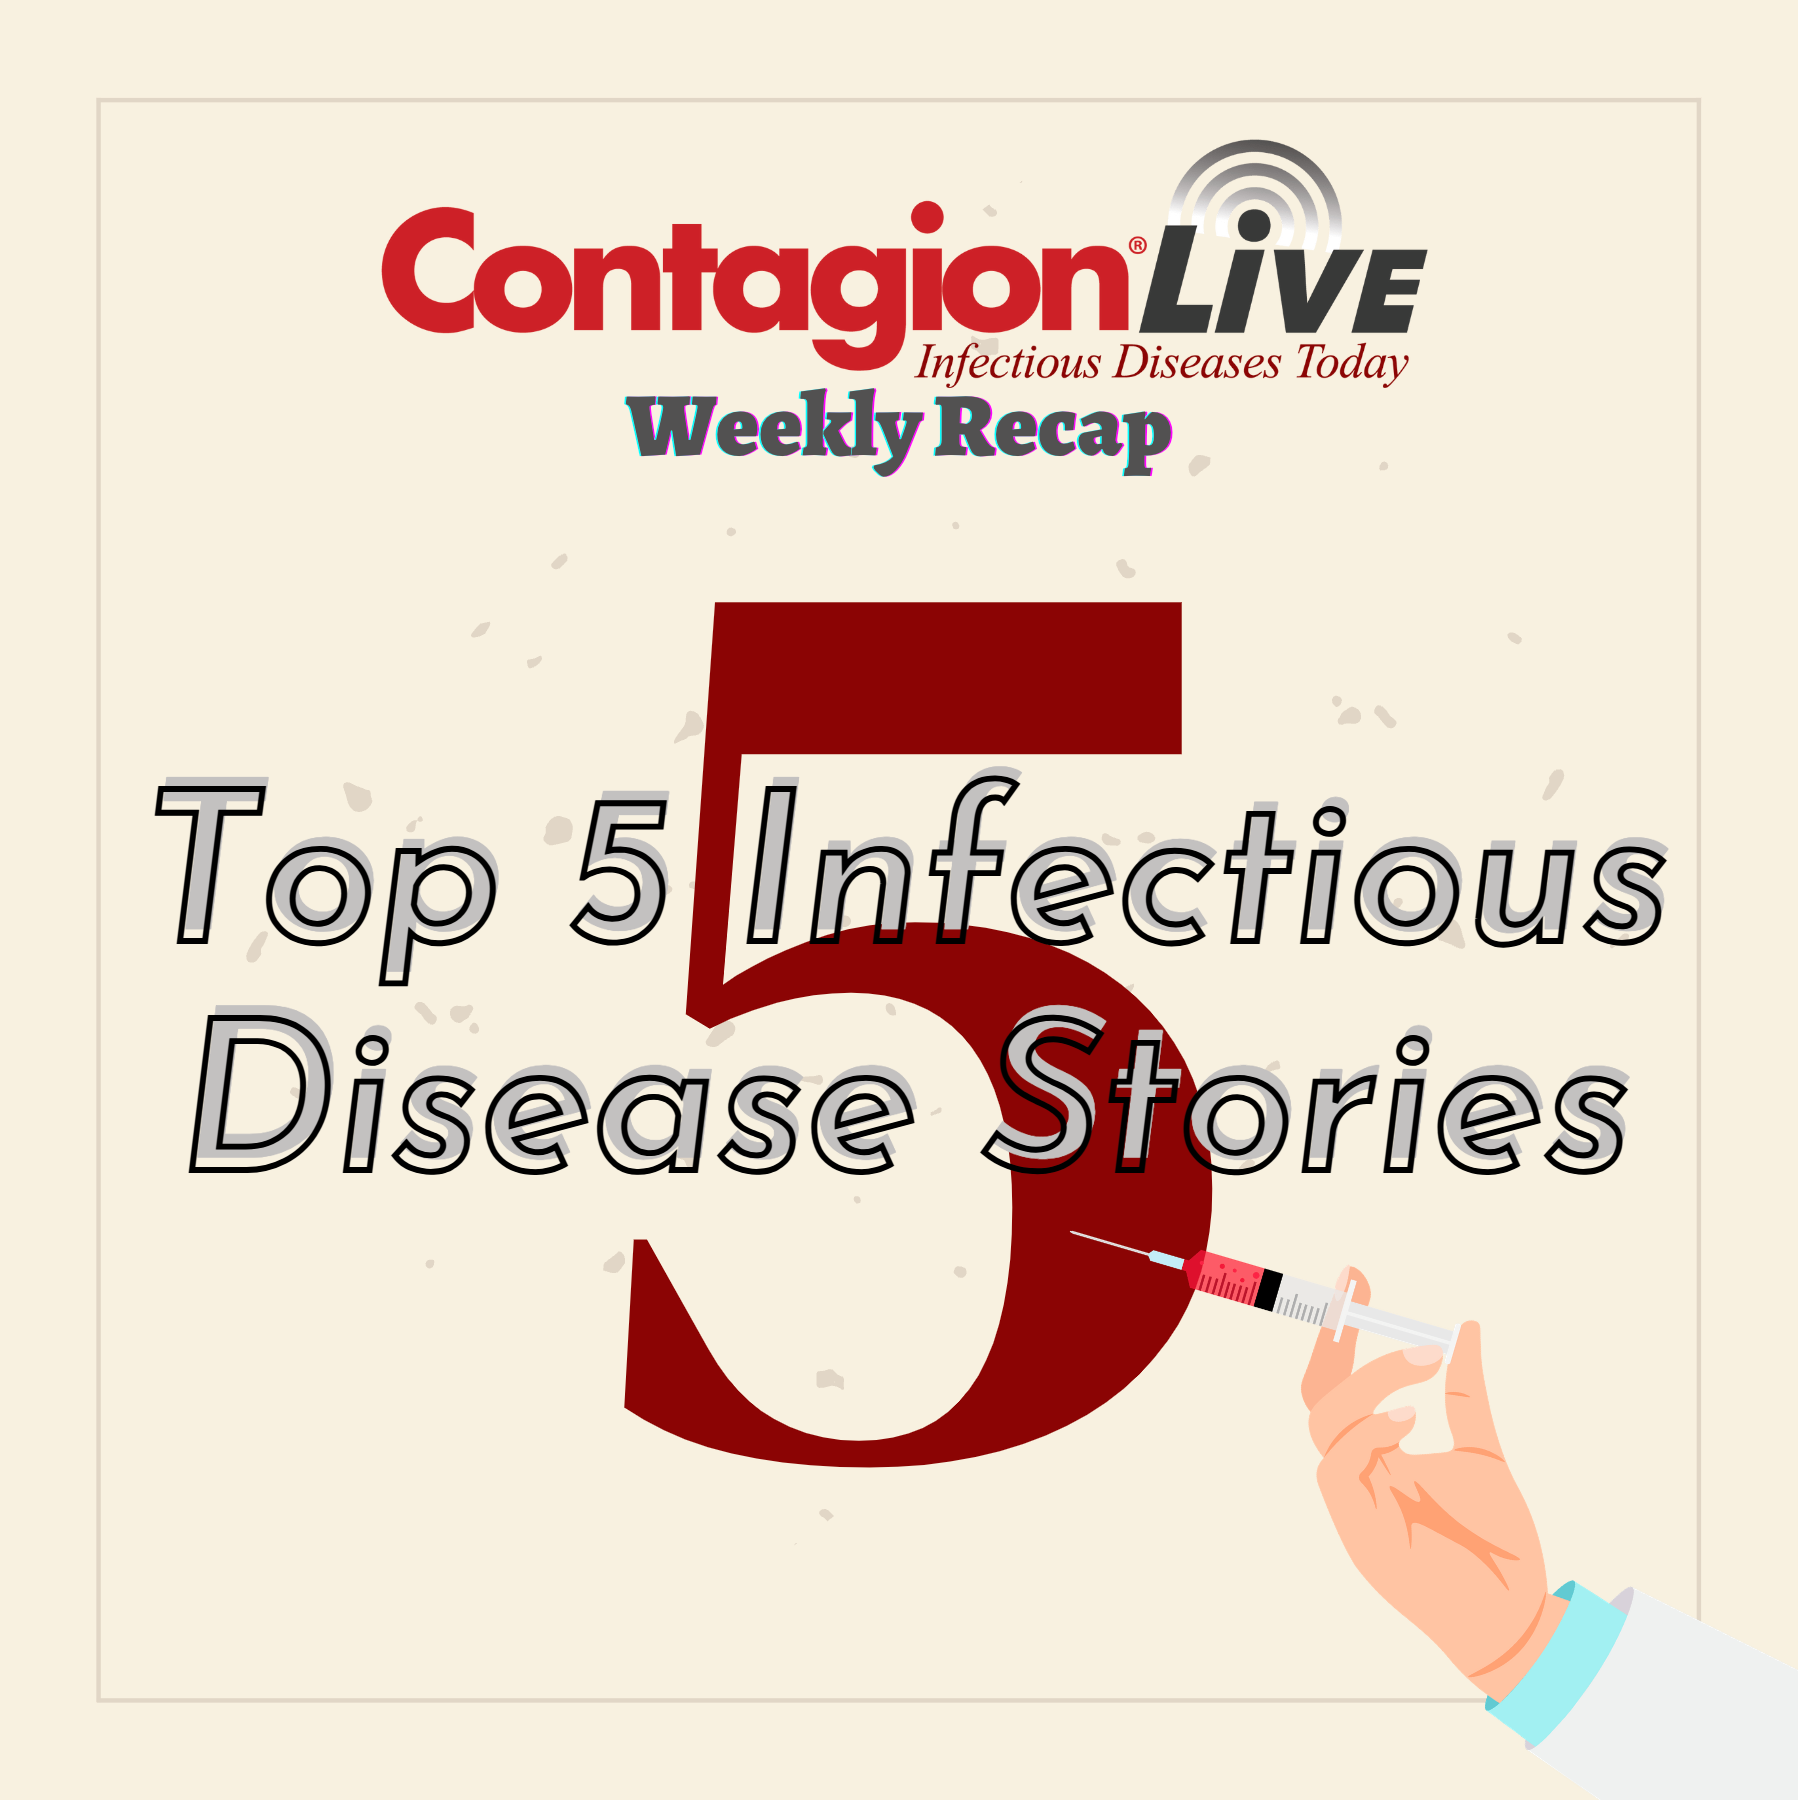 Infectious Disease Week in Review